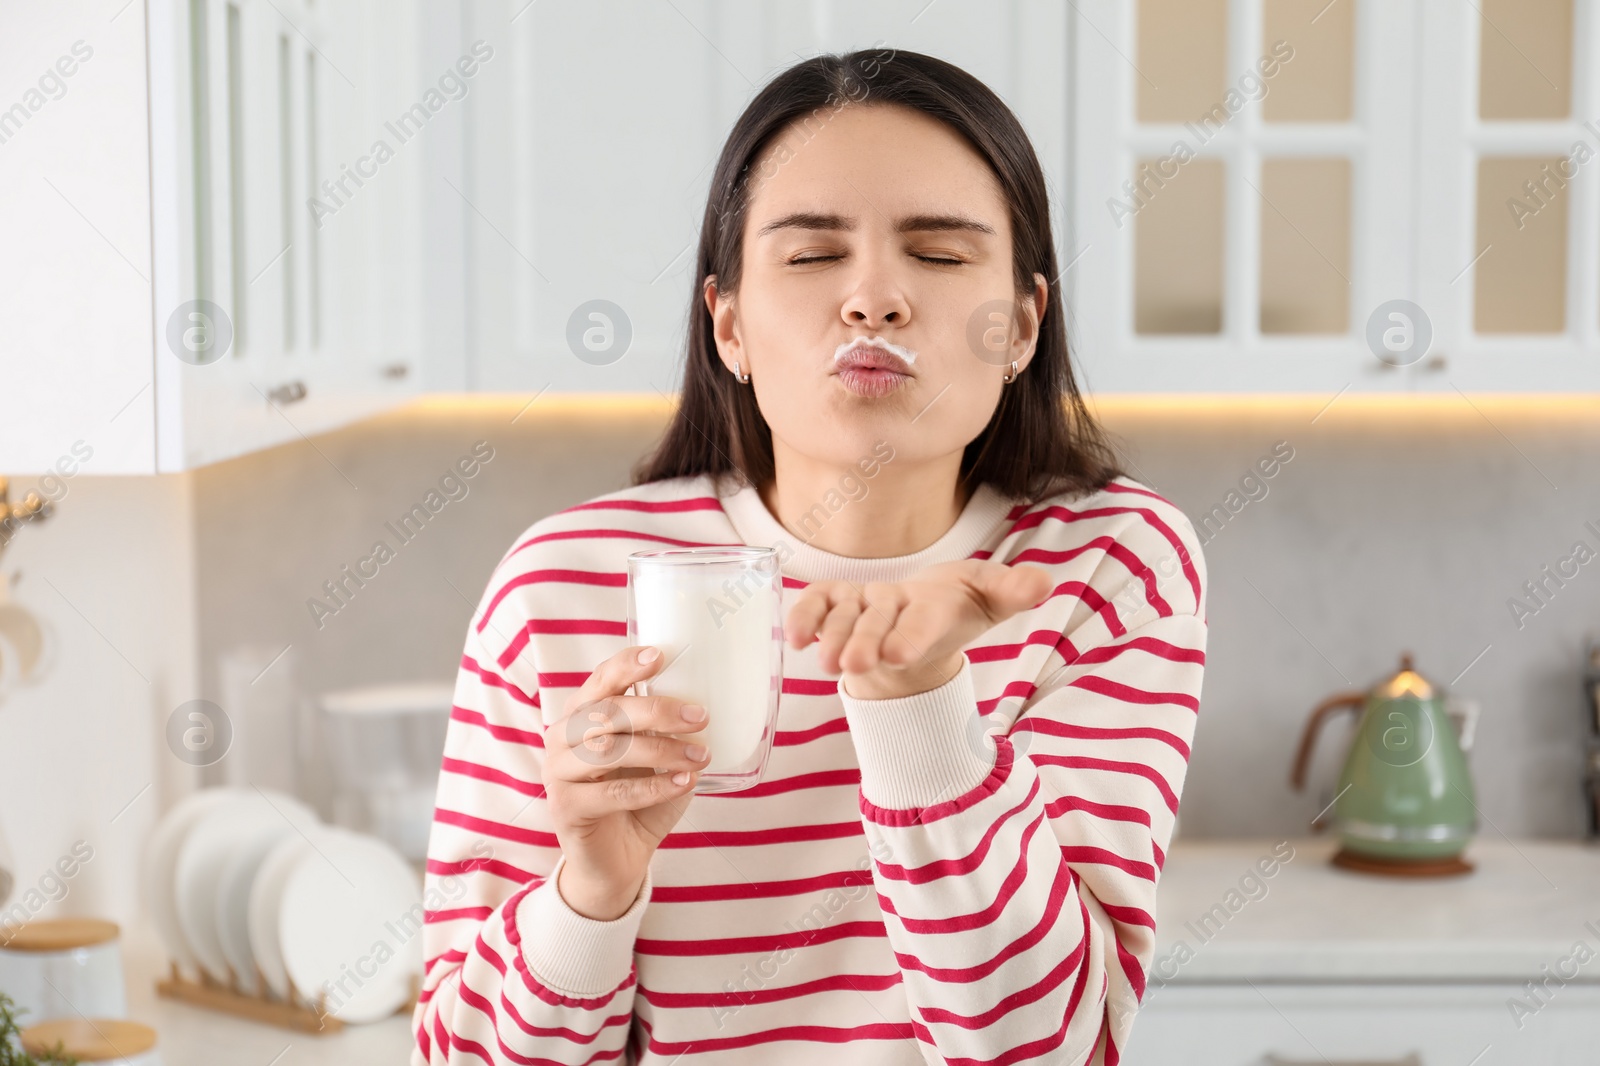 Photo of Happy woman with milk mustache holding glass of tasty dairy drink and sending air kiss in kitchen